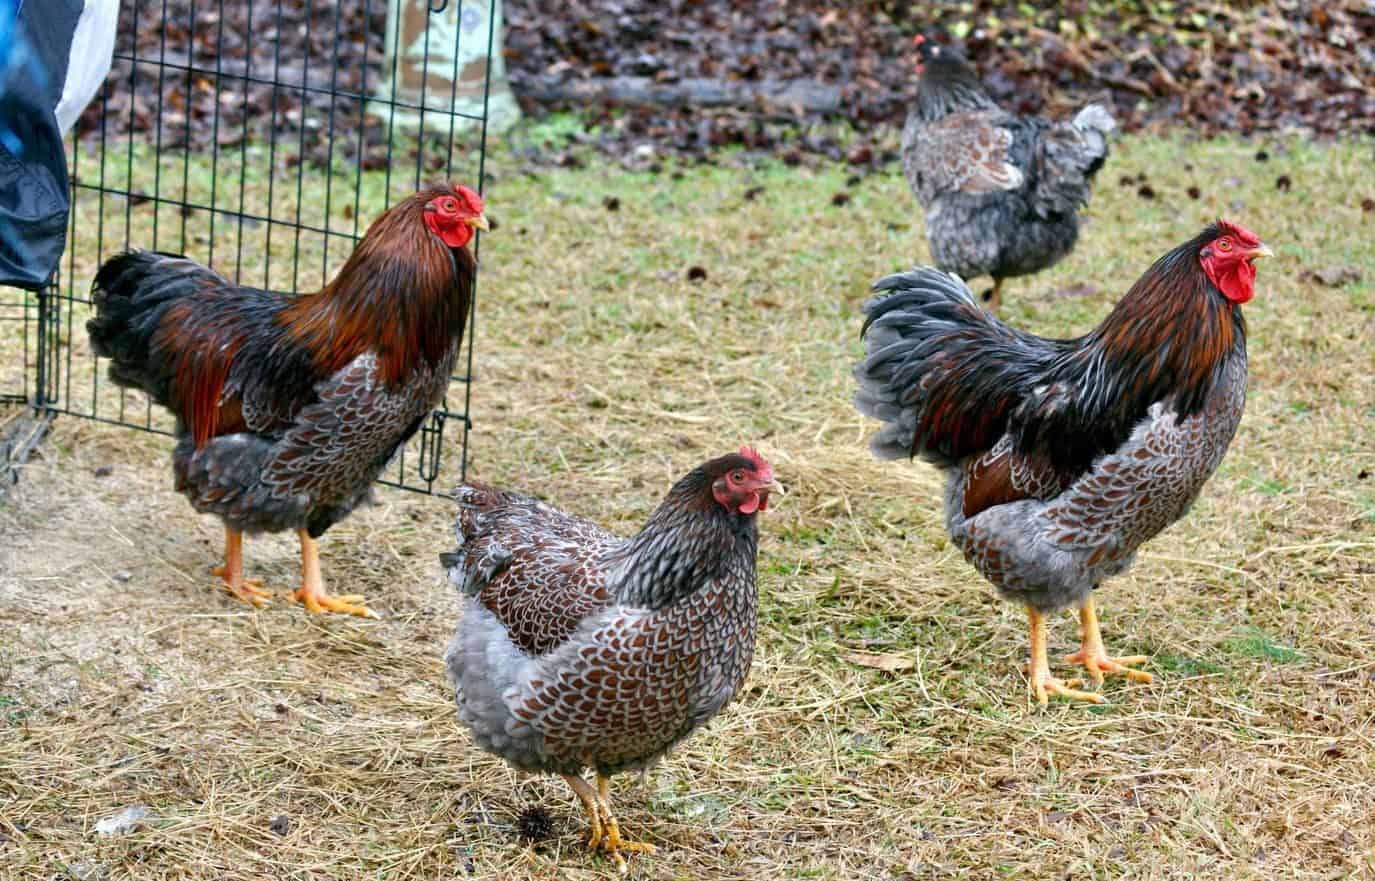 History of the Blue Laced Red Wyandotte